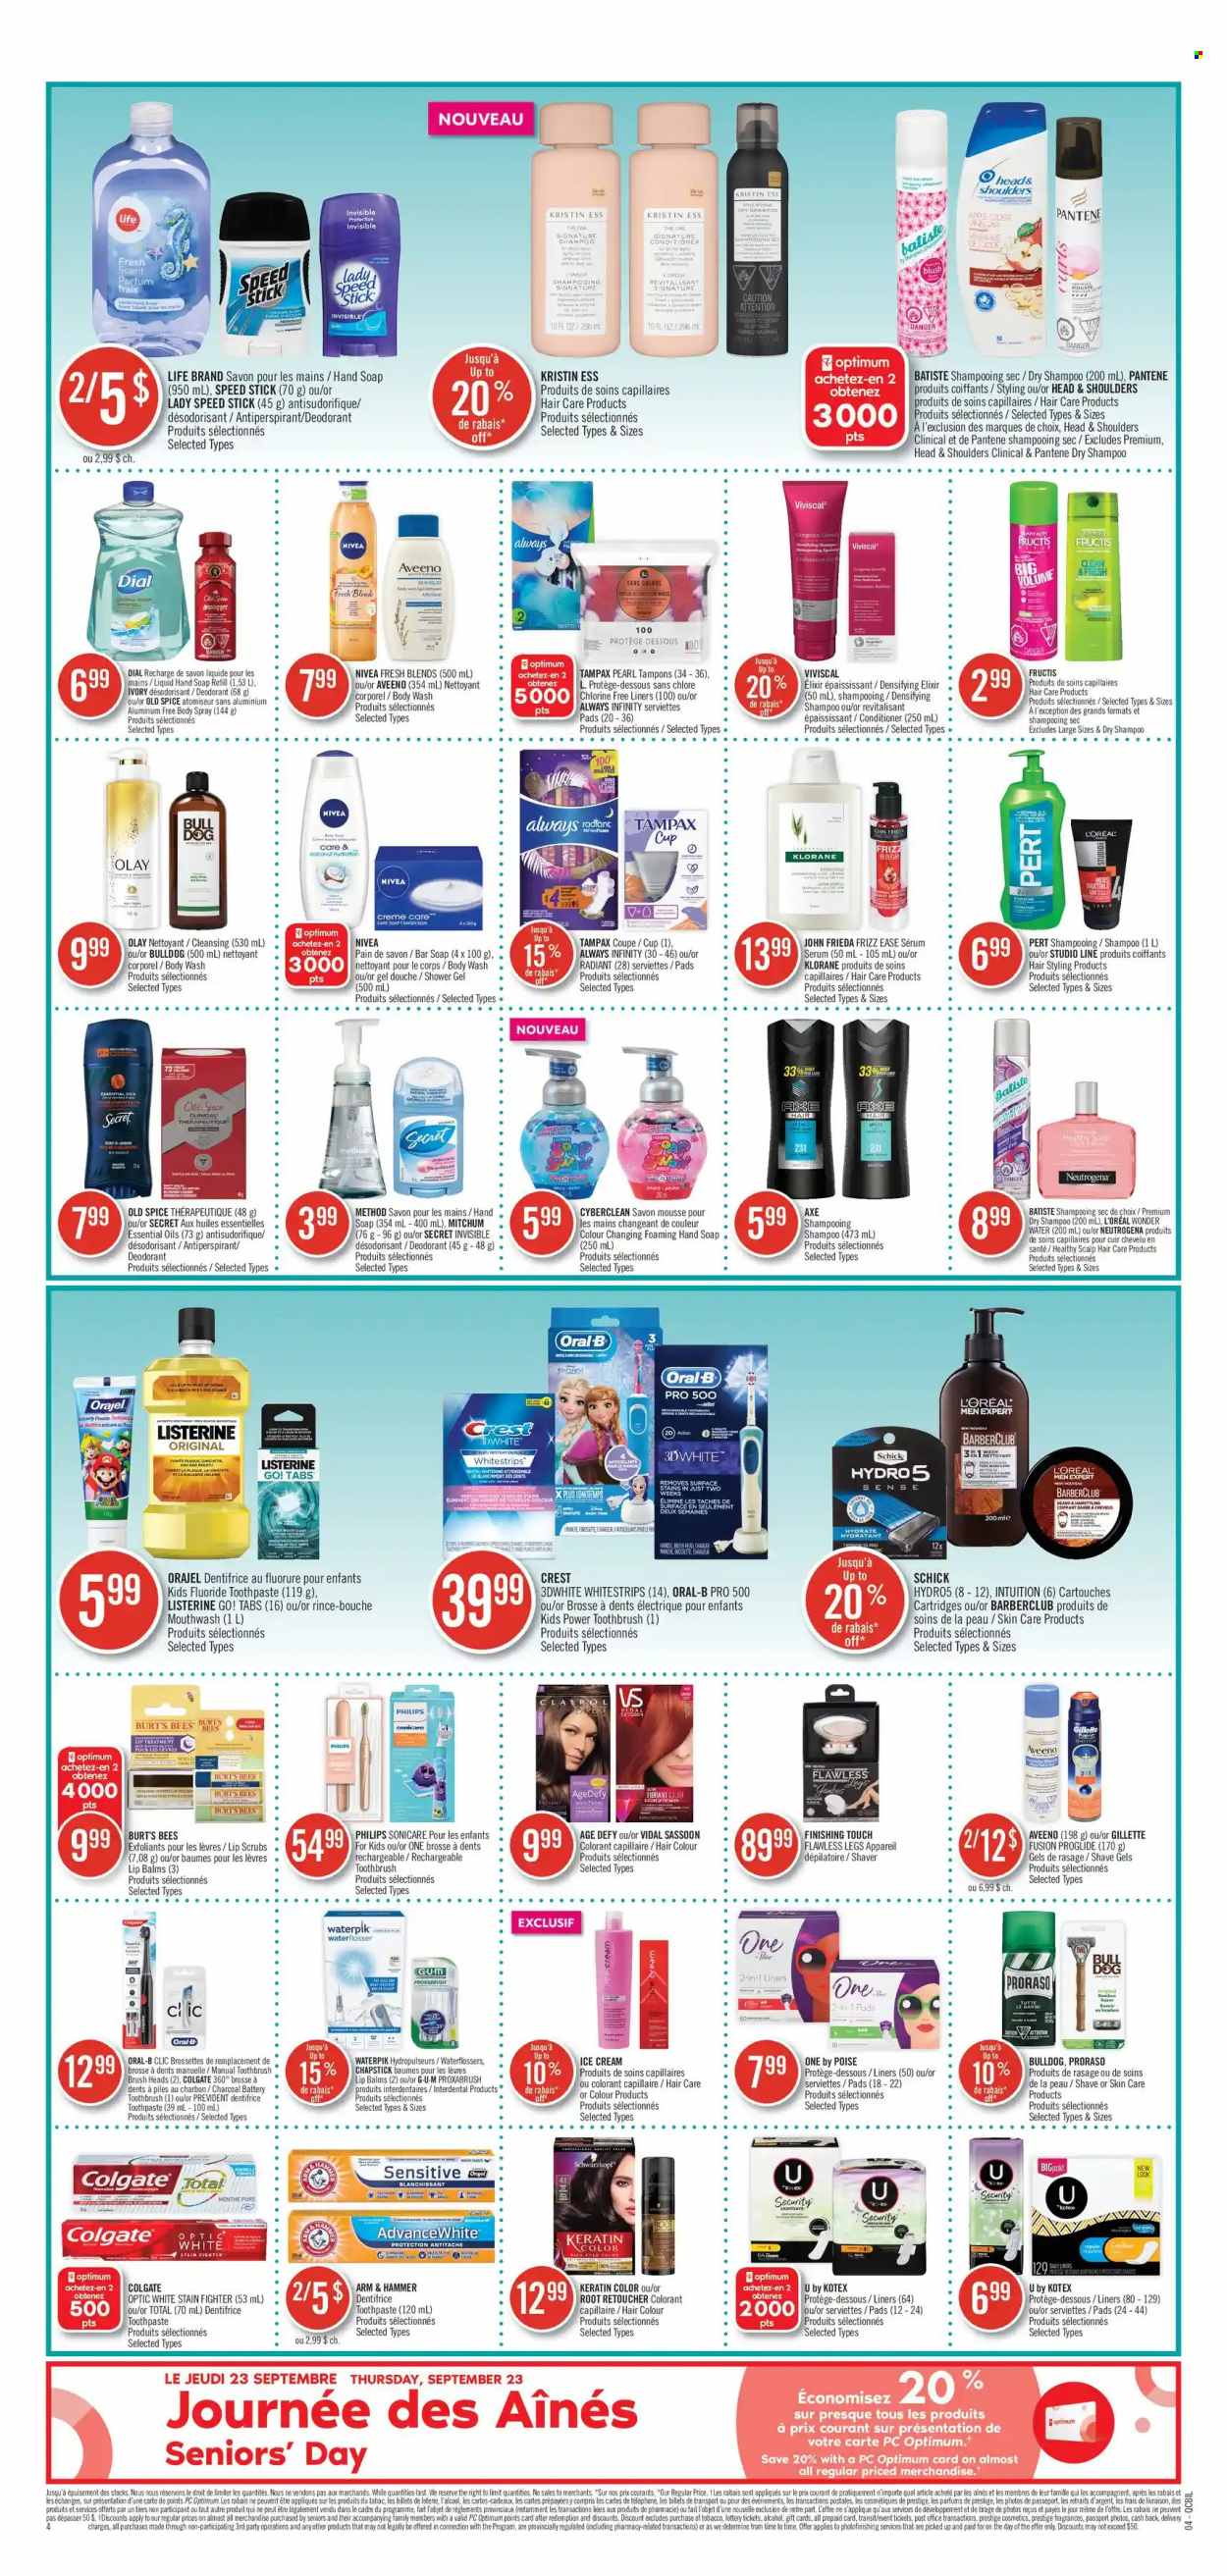 thumbnail - Pharmaprix Flyer - September 18, 2021 - September 24, 2021 - Sales products - Philips, ice cream, ARM & HAMMER, spice, alcohol, Aveeno, body wash, shower gel, hand soap, soap bar, Dial, soap, toothbrush, toothpaste, mouthwash, Crest, Kotex, tampons, Always Infinity, L’Oréal, serum, Olay, L’Oréal Men, conditioner, hair color, keratin, John Frieda, Klorane, Fructis, body spray, anti-perspirant, Speed Stick, Schick, shaver, cup, essential oils, Sonicare, Go!, Colgate, Gillette, Listerine, Neutrogena, shampoo, Tampax, Head & Shoulders, Pantene, Nivea, Old Spice, Oral-B, Schwarzkopf, deodorant. Page 4.